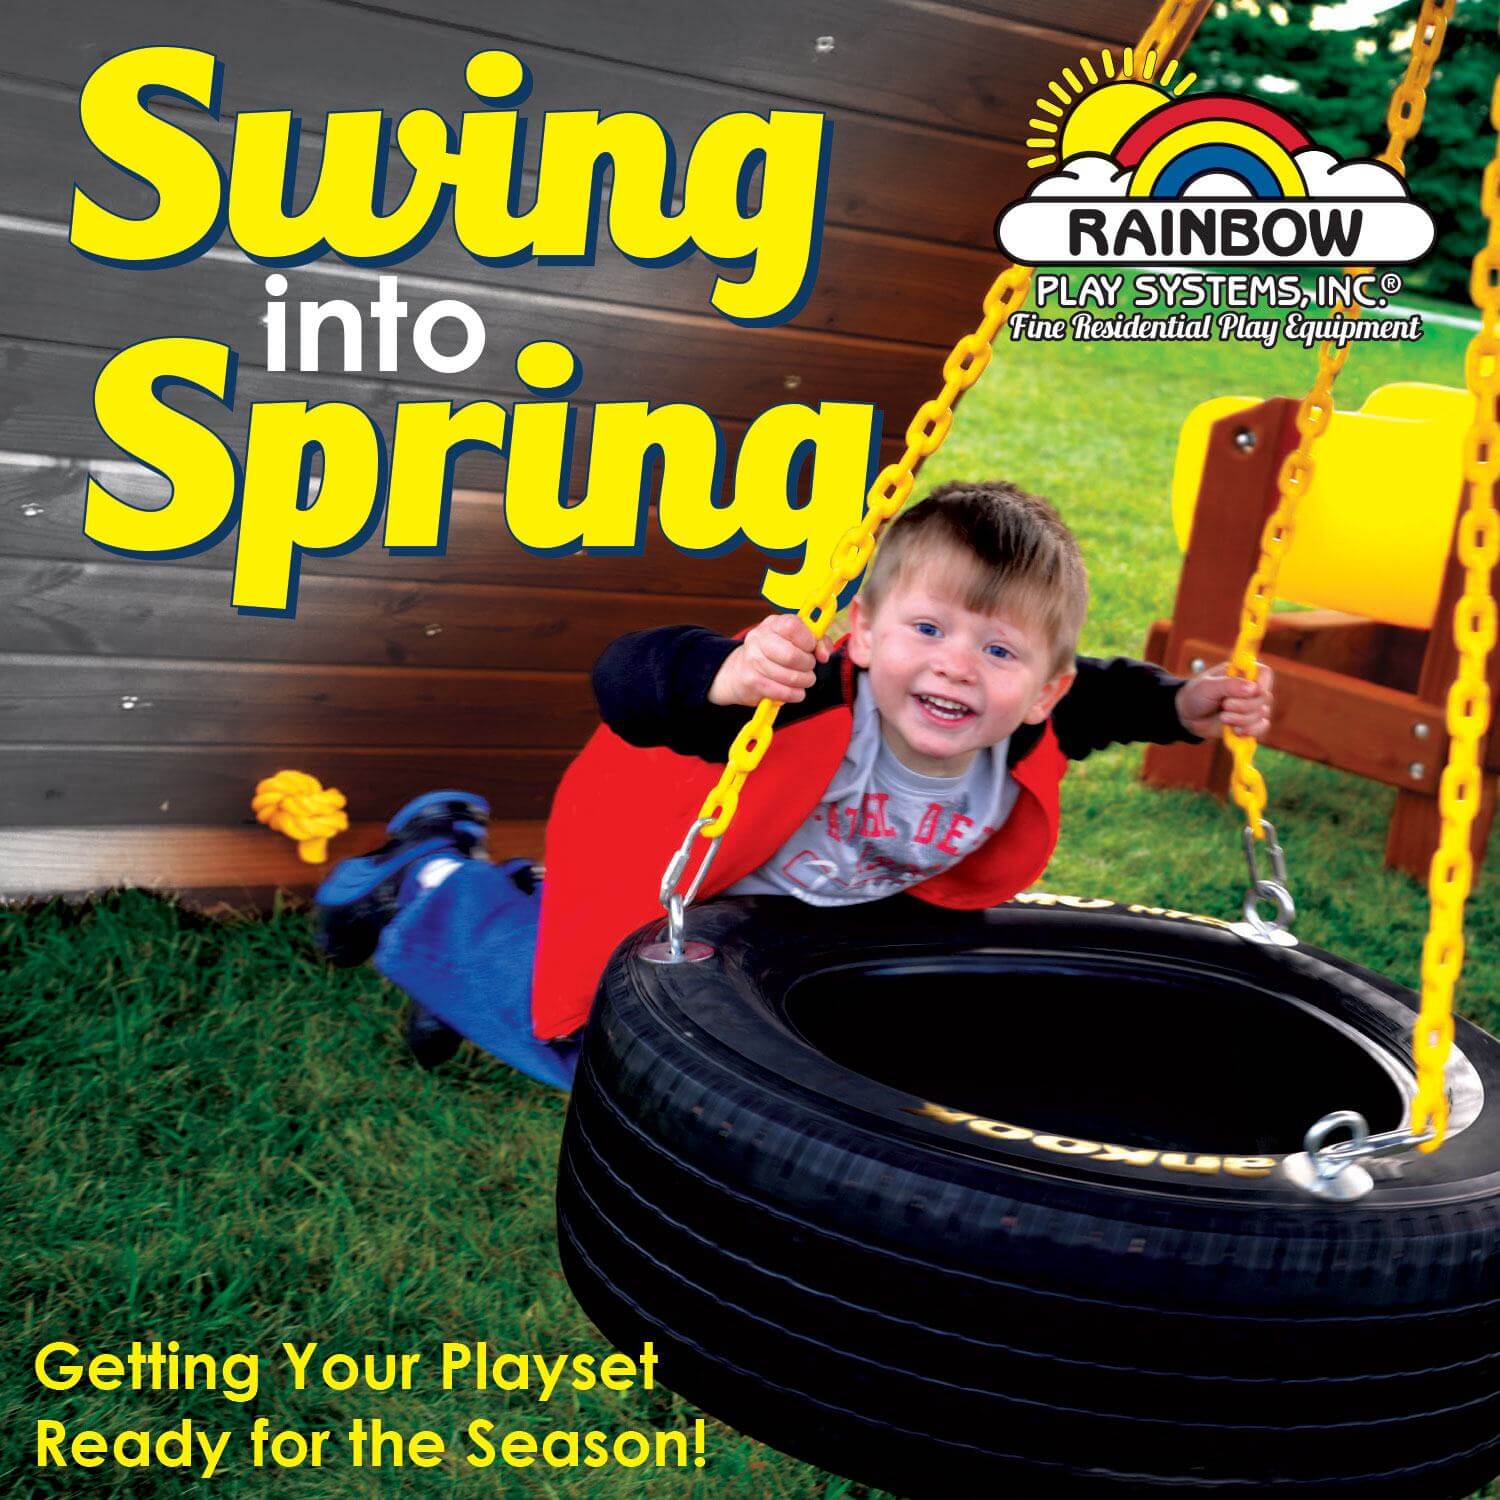 Swing into Spring Getting Your Playset Ready for the Season! Rainbow